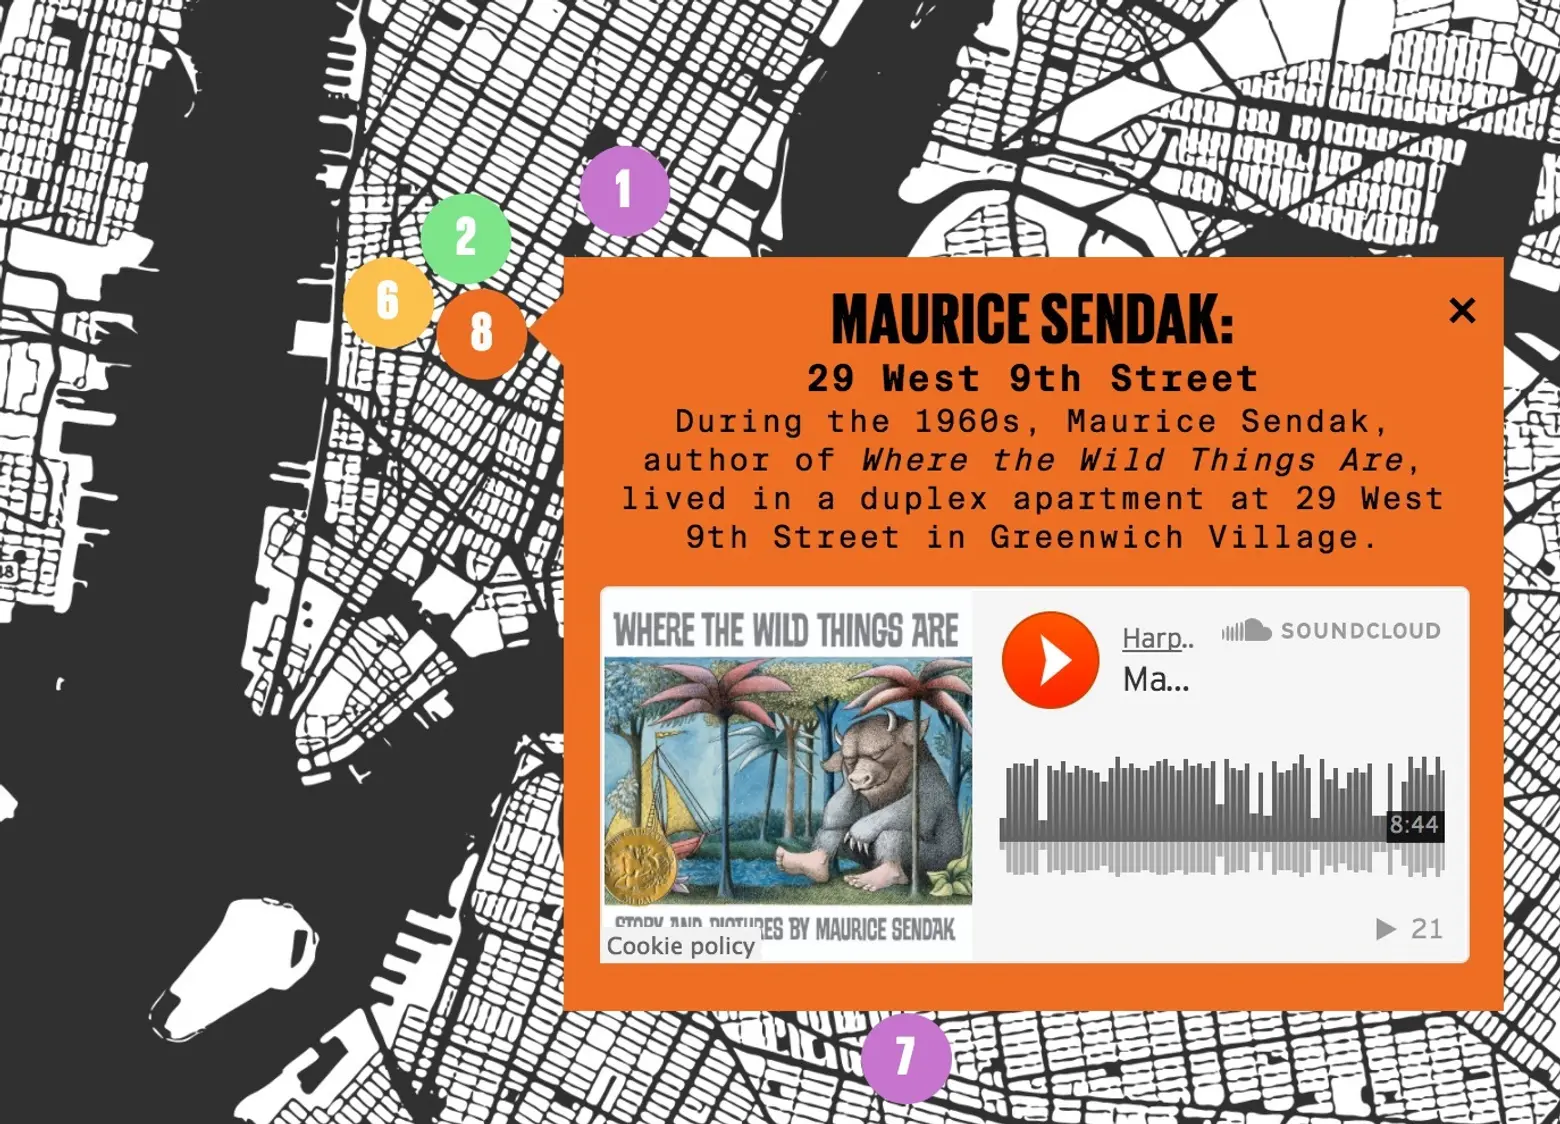 Explore the homes of NYC’s notable writers with an audio-narrated tour